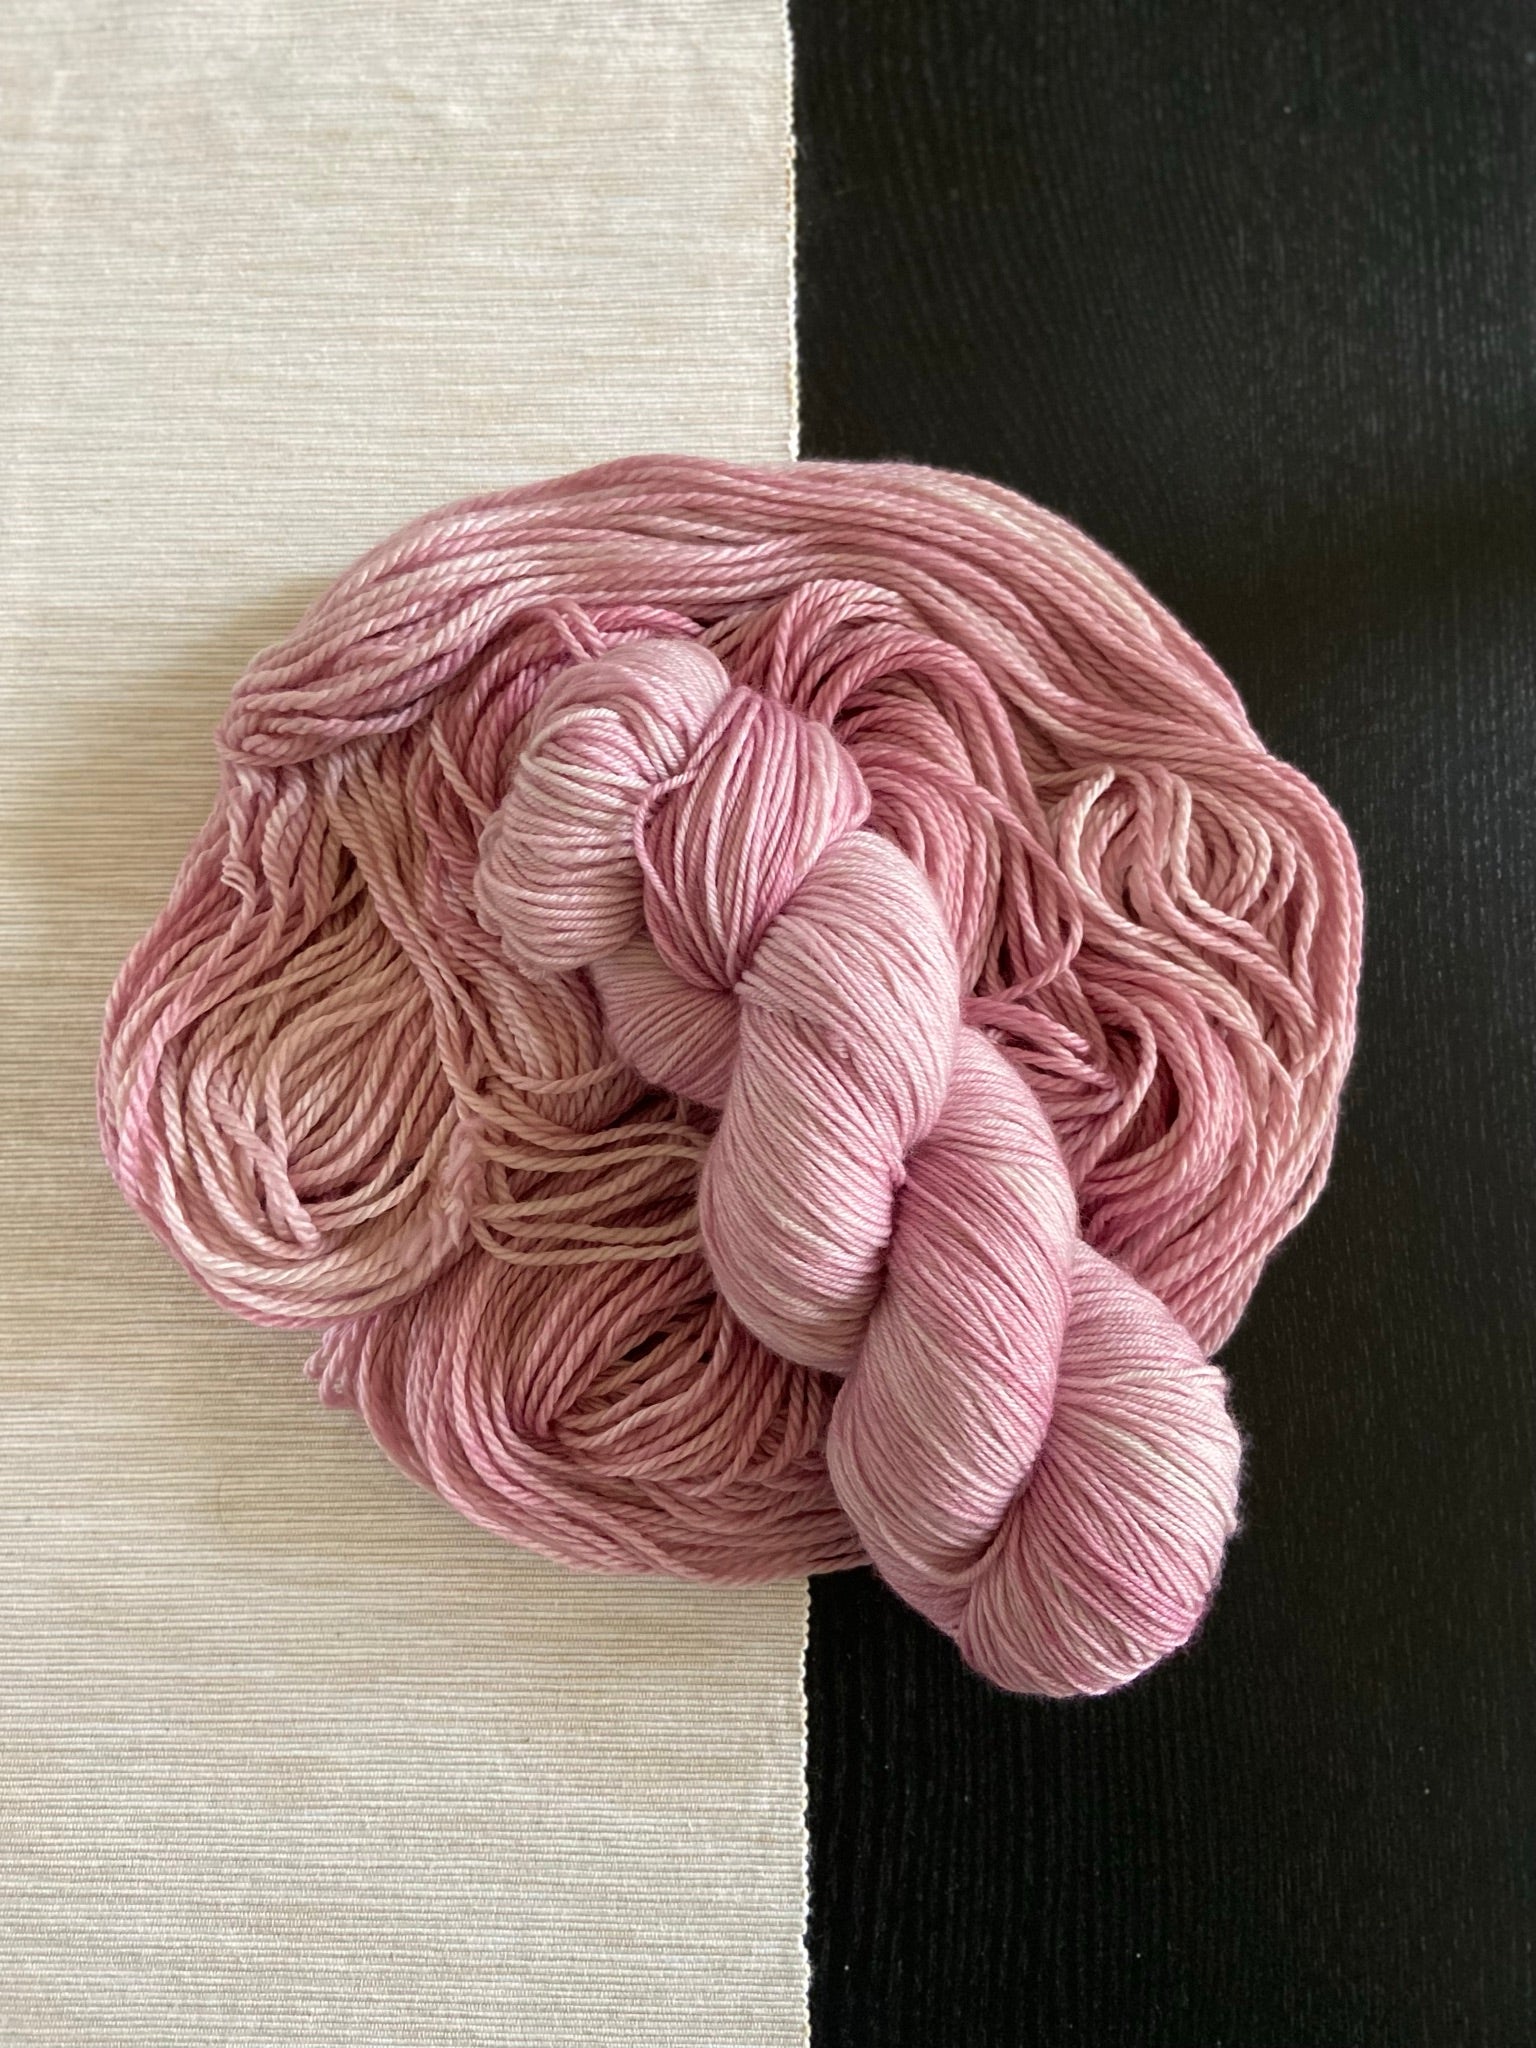 a skein of hand dyed pink yarn laid on top of more yarn